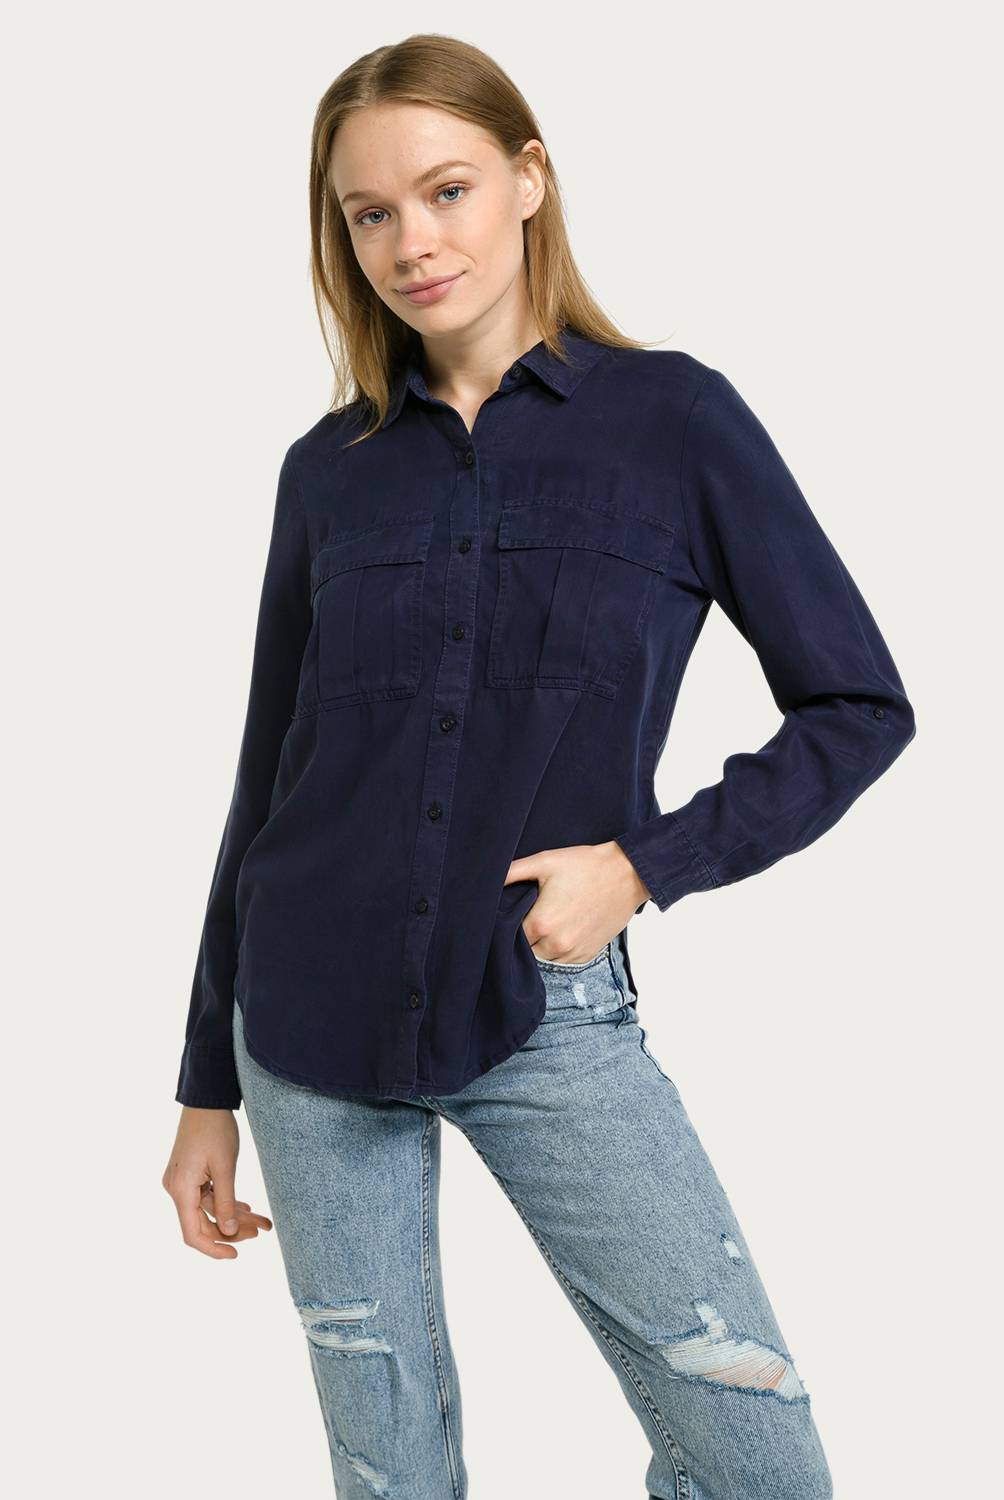 ONLY - Blusa Mujer